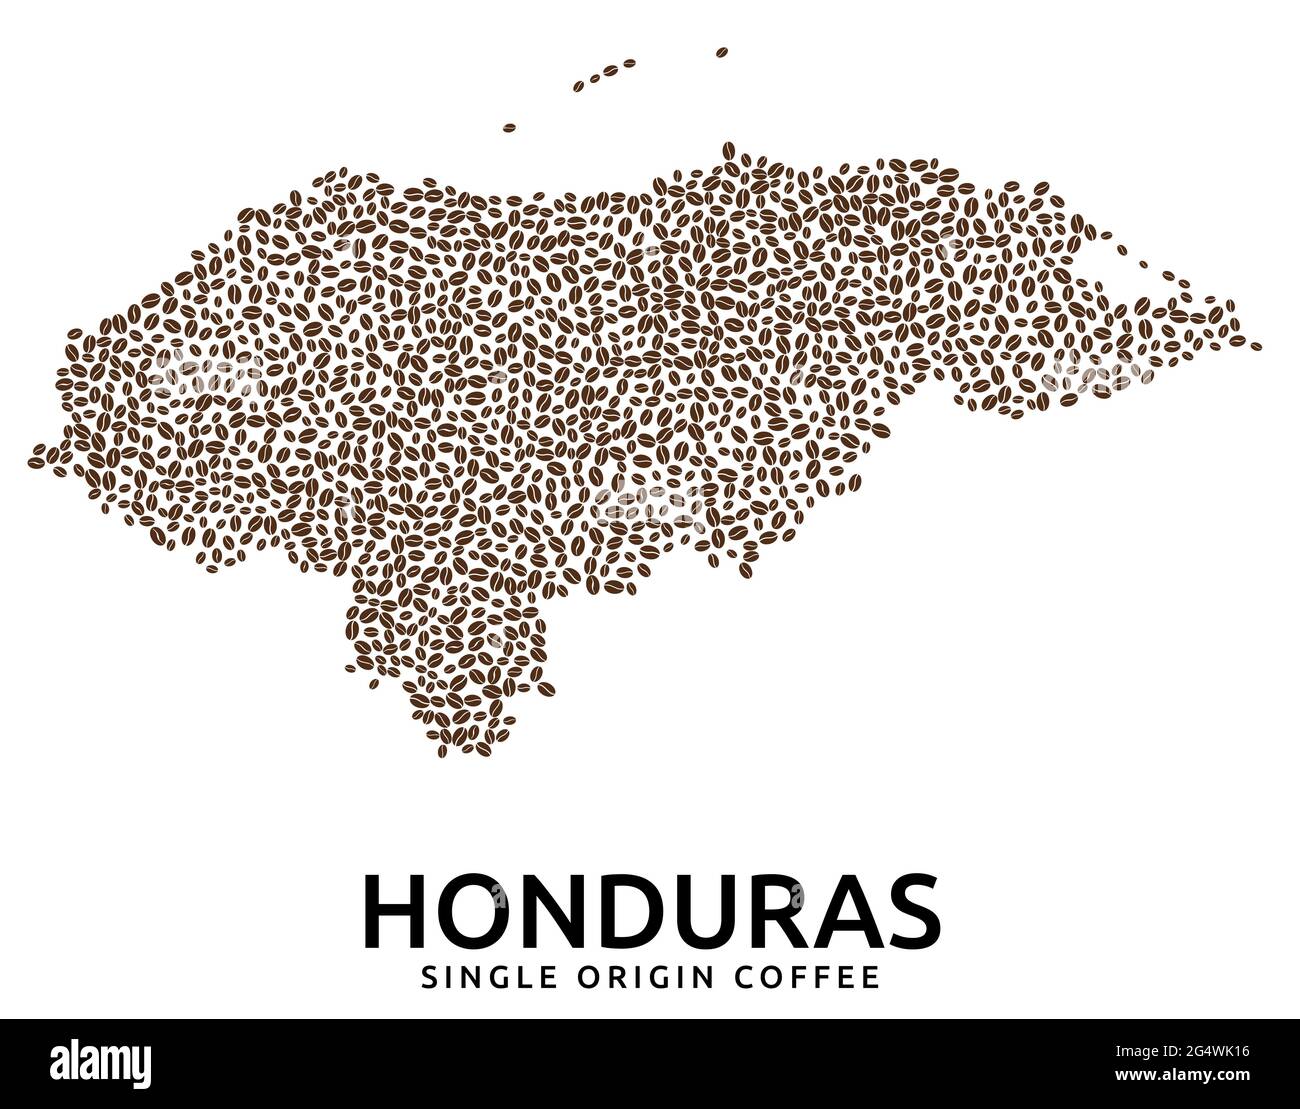 Shape of Honduras map made of scattered coffee beans, country name below Stock Vector